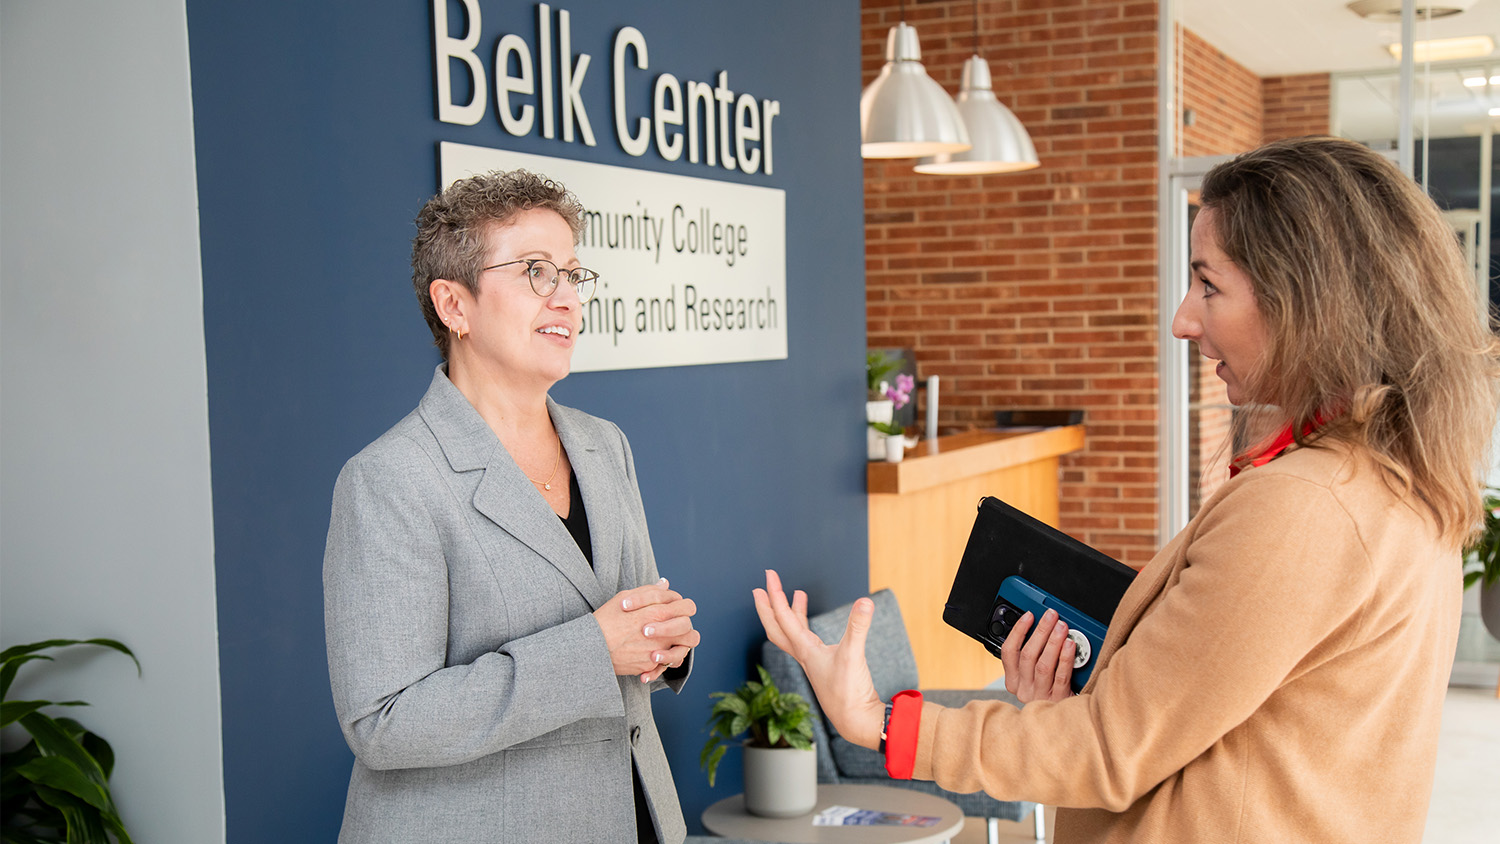 Belk Center Executive Director Audrey Jaeger talking with another person at the Belk Center